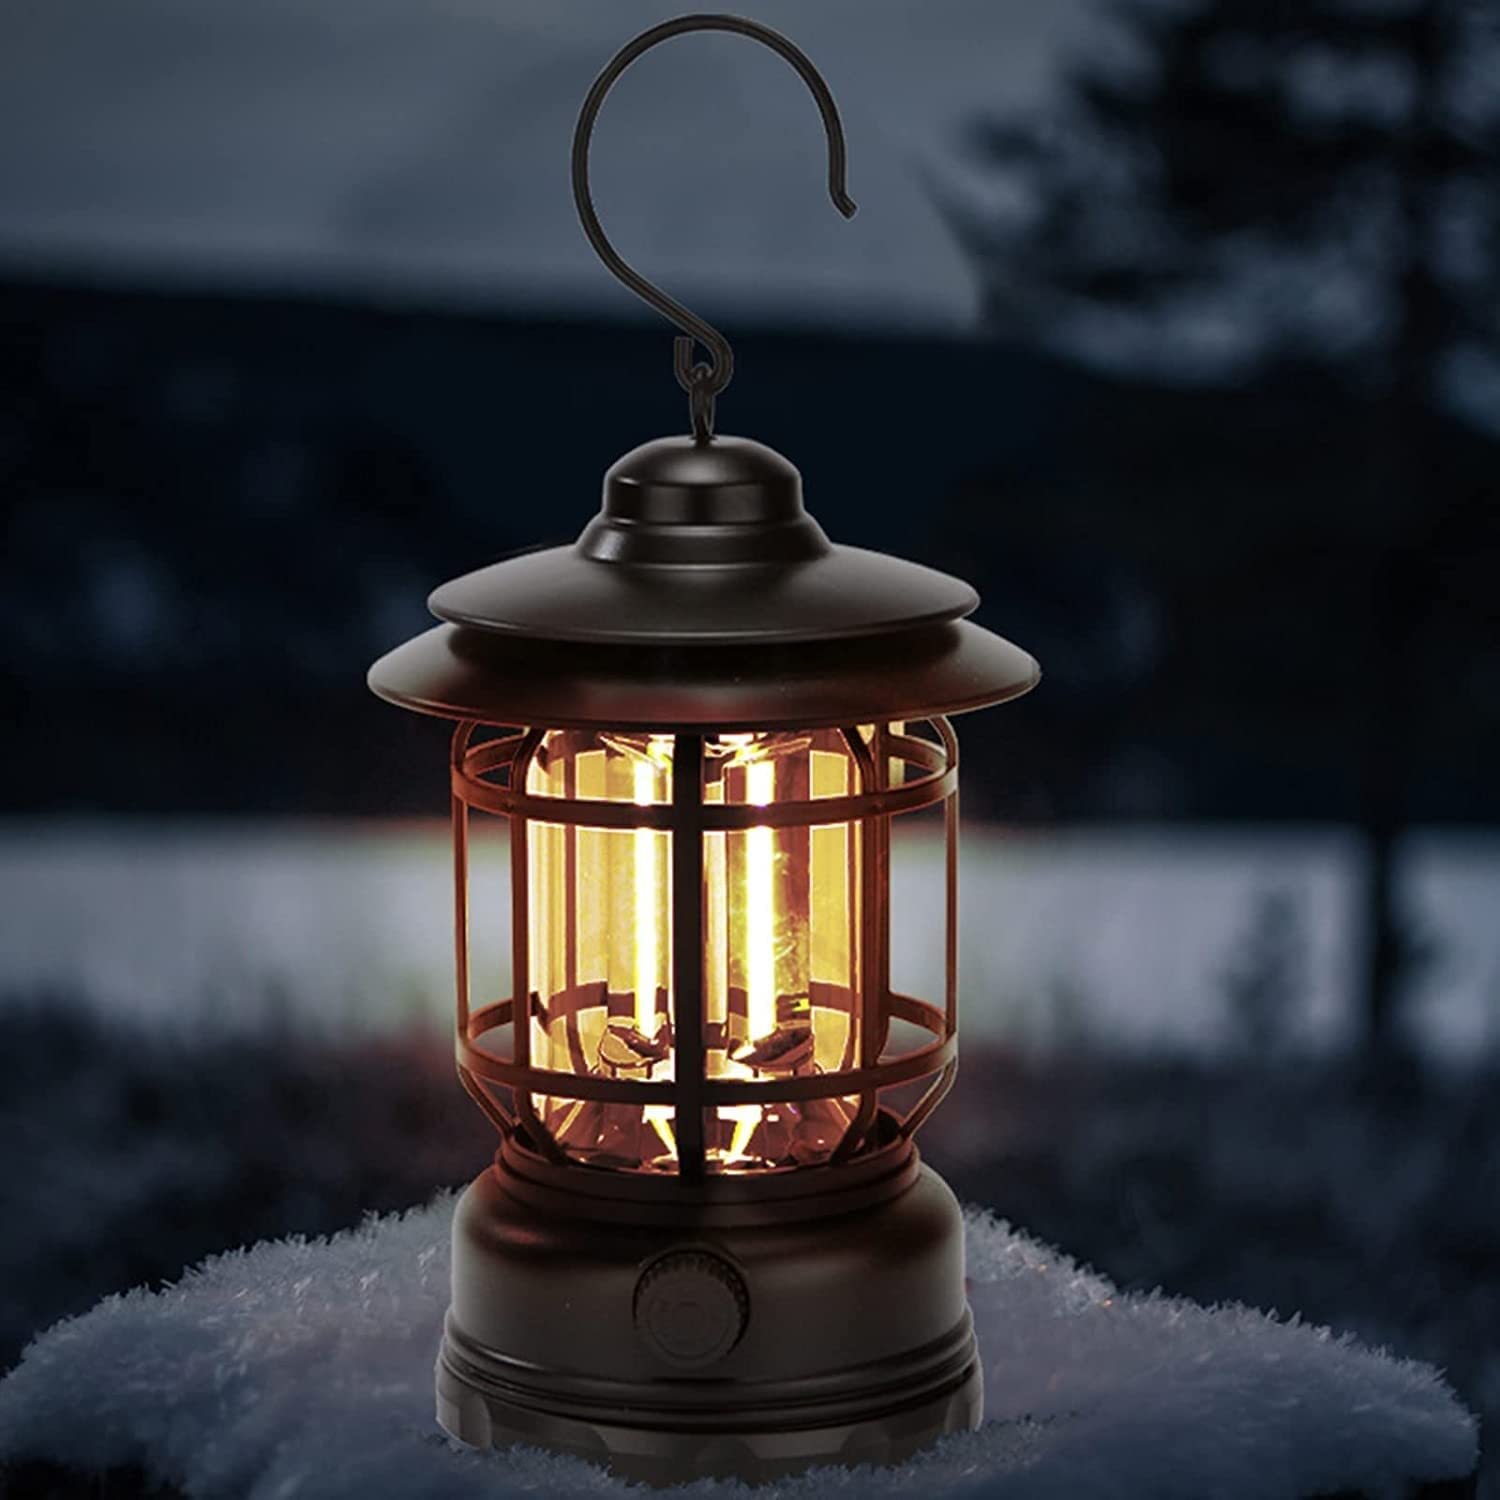 Light up your night with weather-resistant fishing lamps